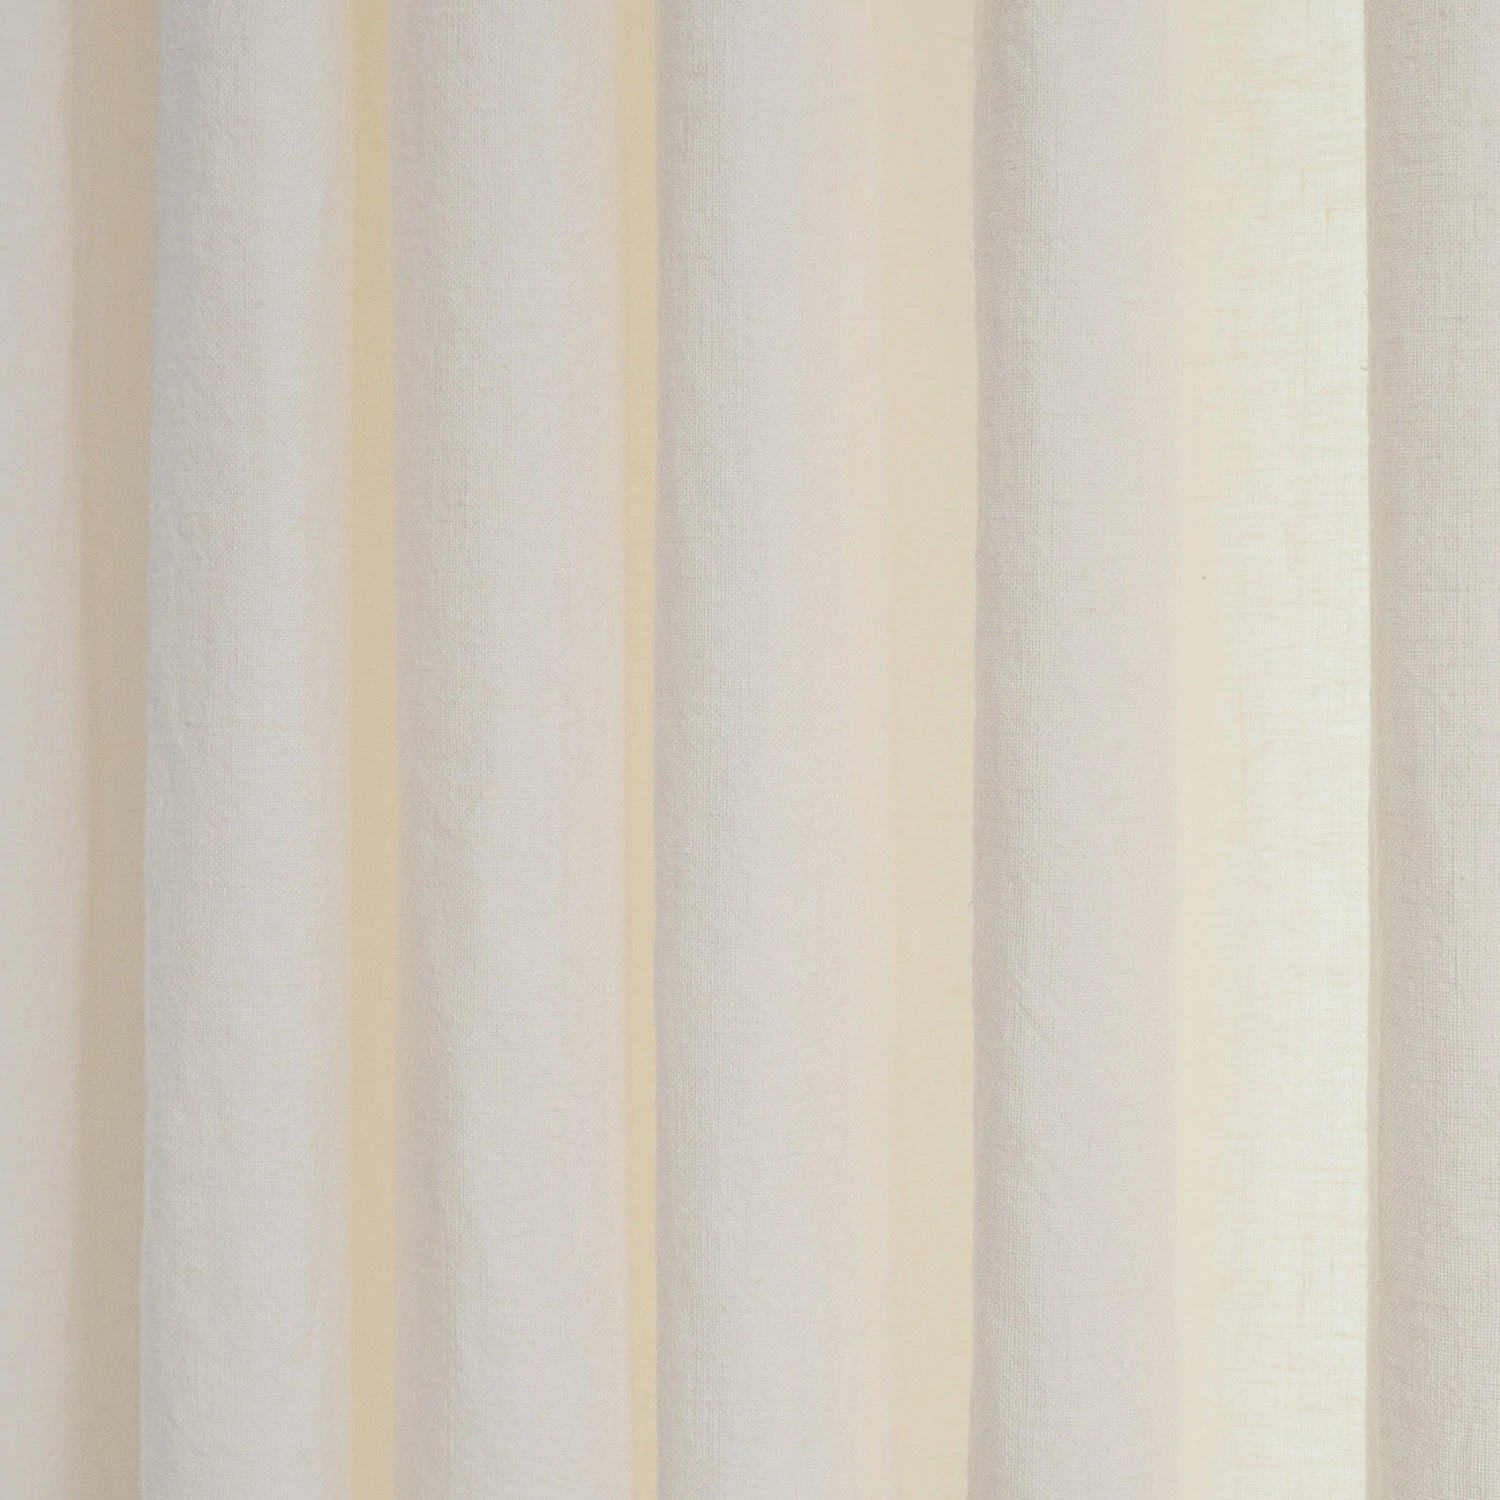 Iris Polyester Pinch Pleat Drapery Custom Curtains Blackout Curtains Ivory White